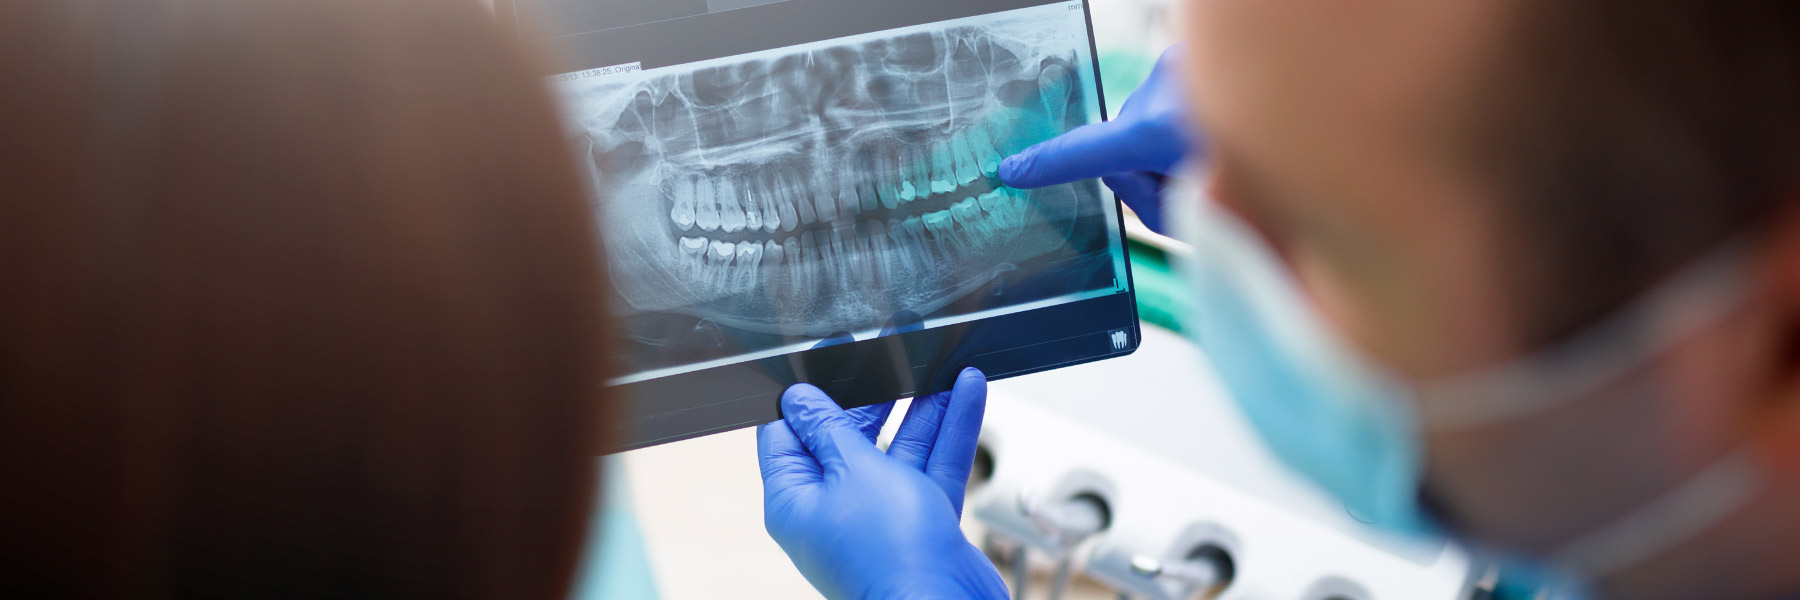 A dentistry professional points at an x-ray of teeth.